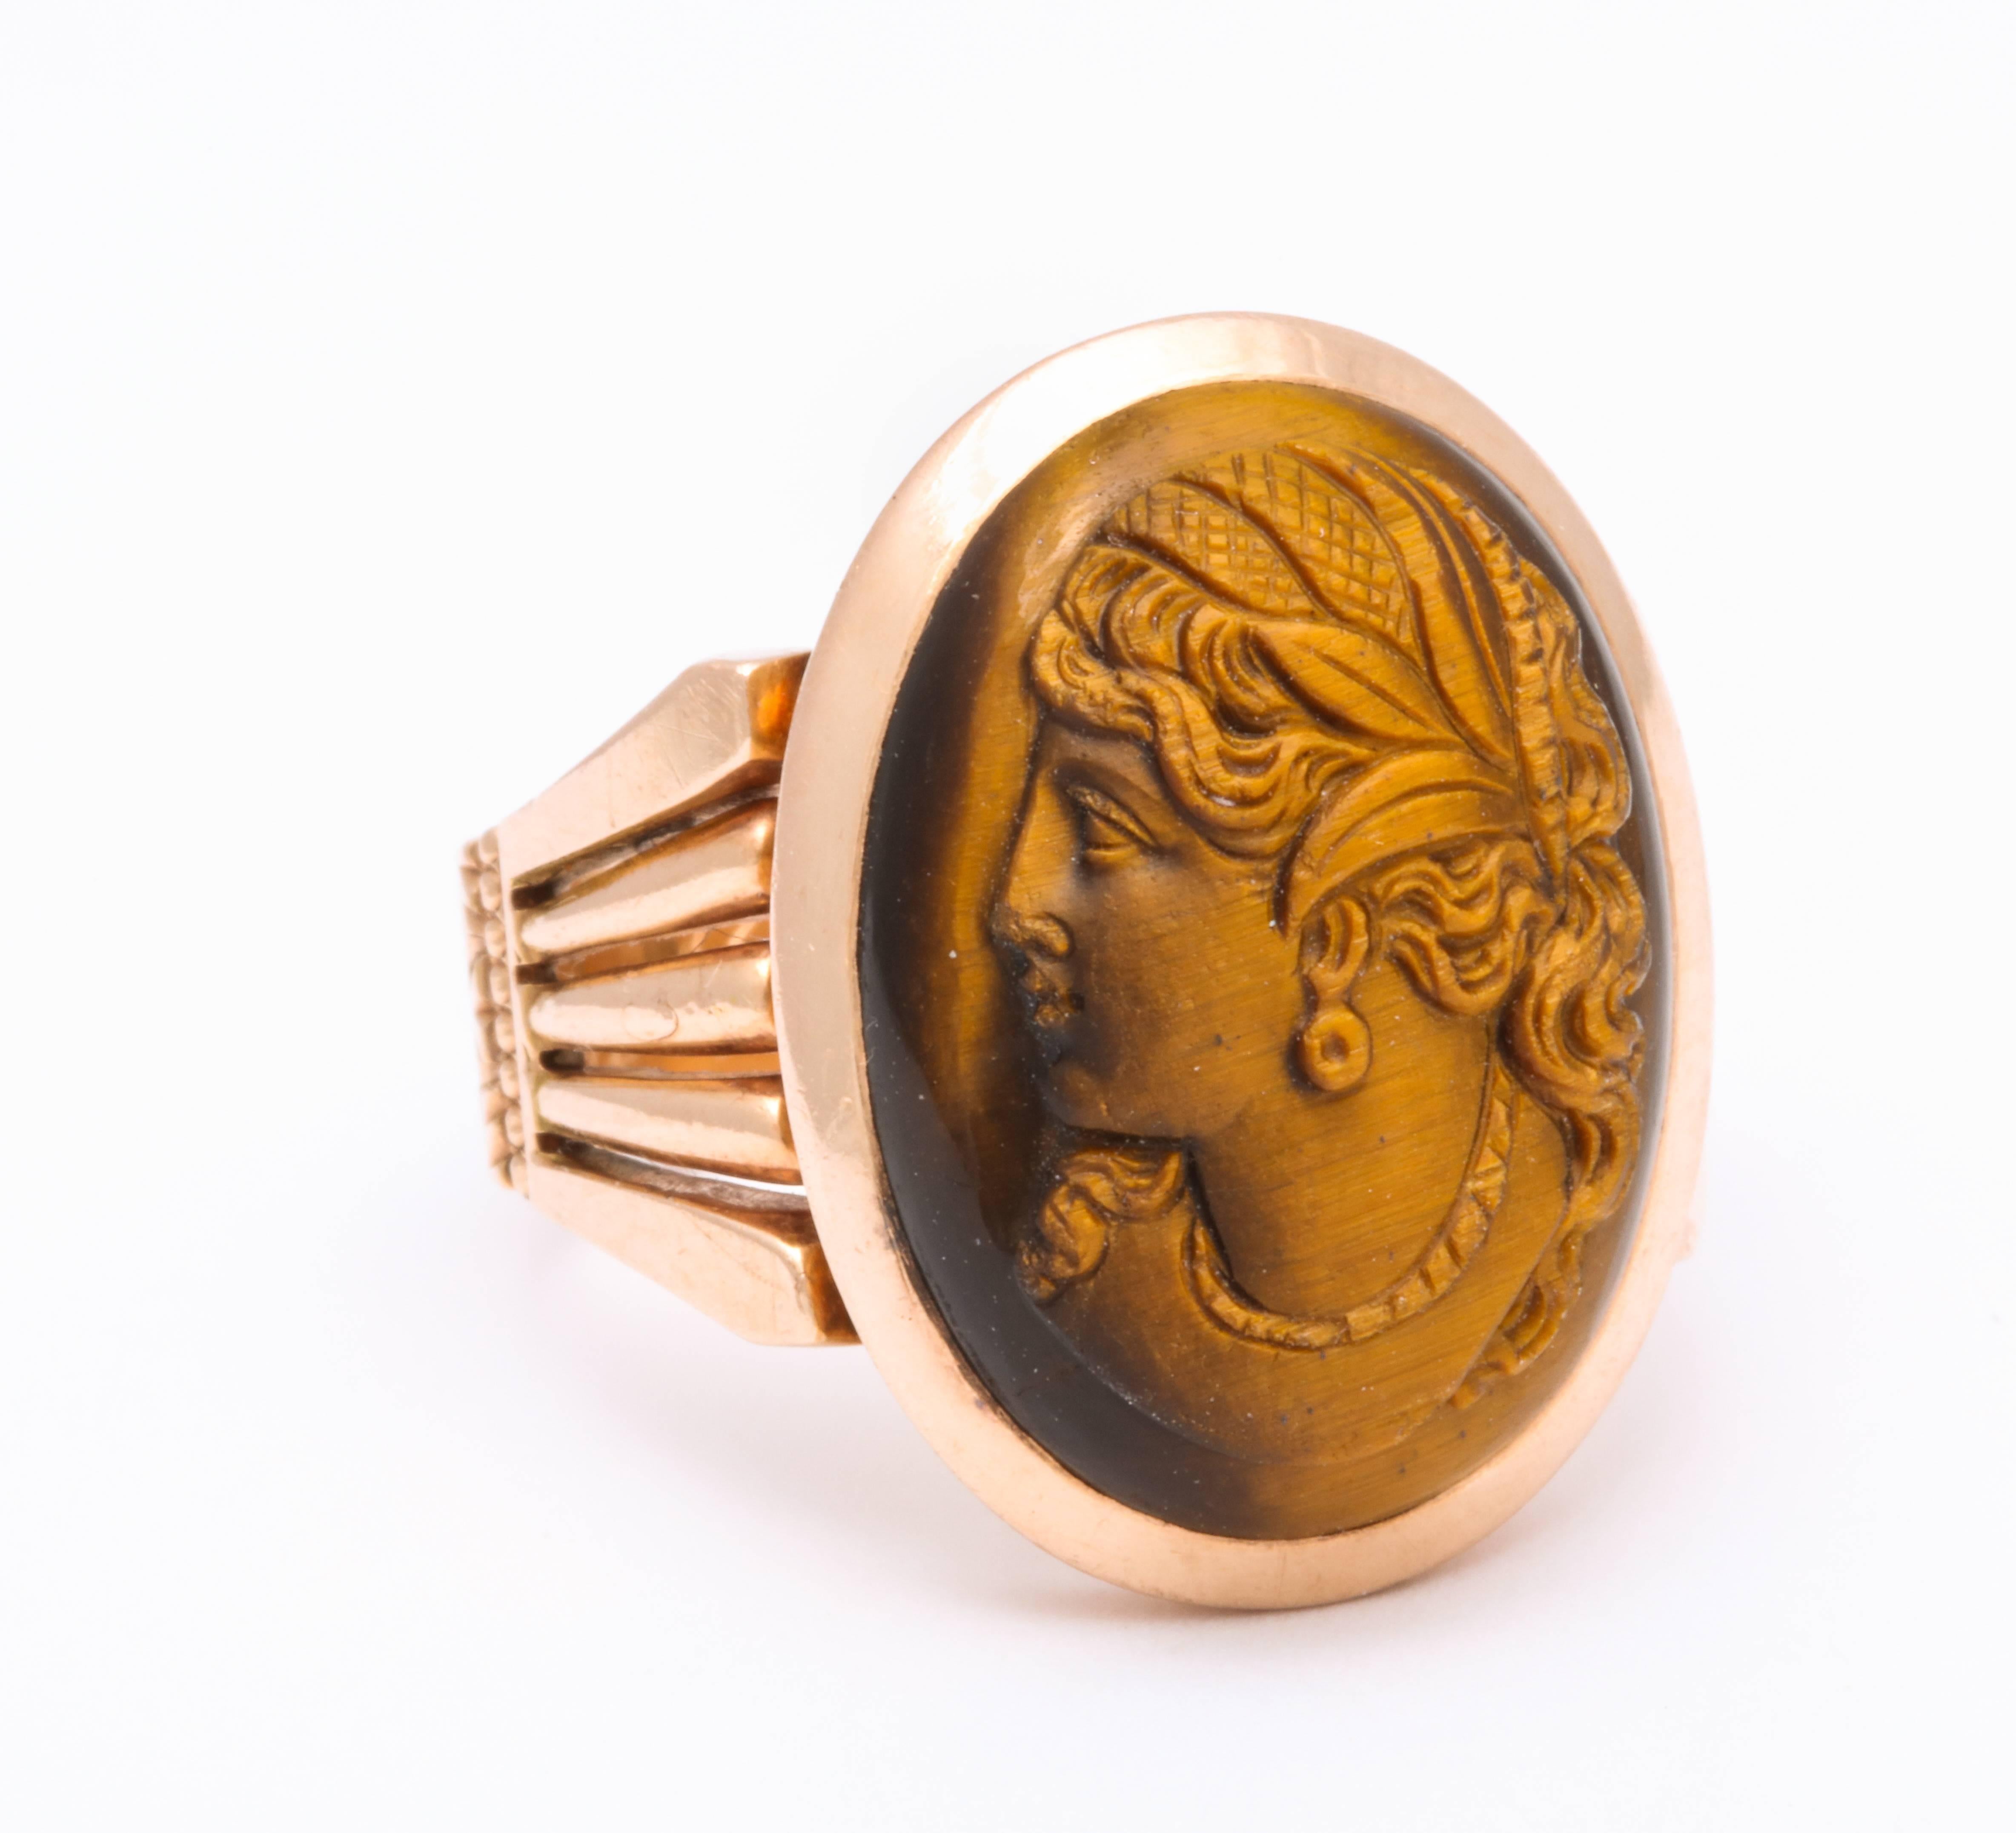 A substantial shank of 14 kt gold holds a gem tiger eye stone cameo of a sensuous classical woman, wearing a diadem engraved in crosshatch. The stone of two colors, carved to perfection in left profile, brings the golden woman forward flashing in